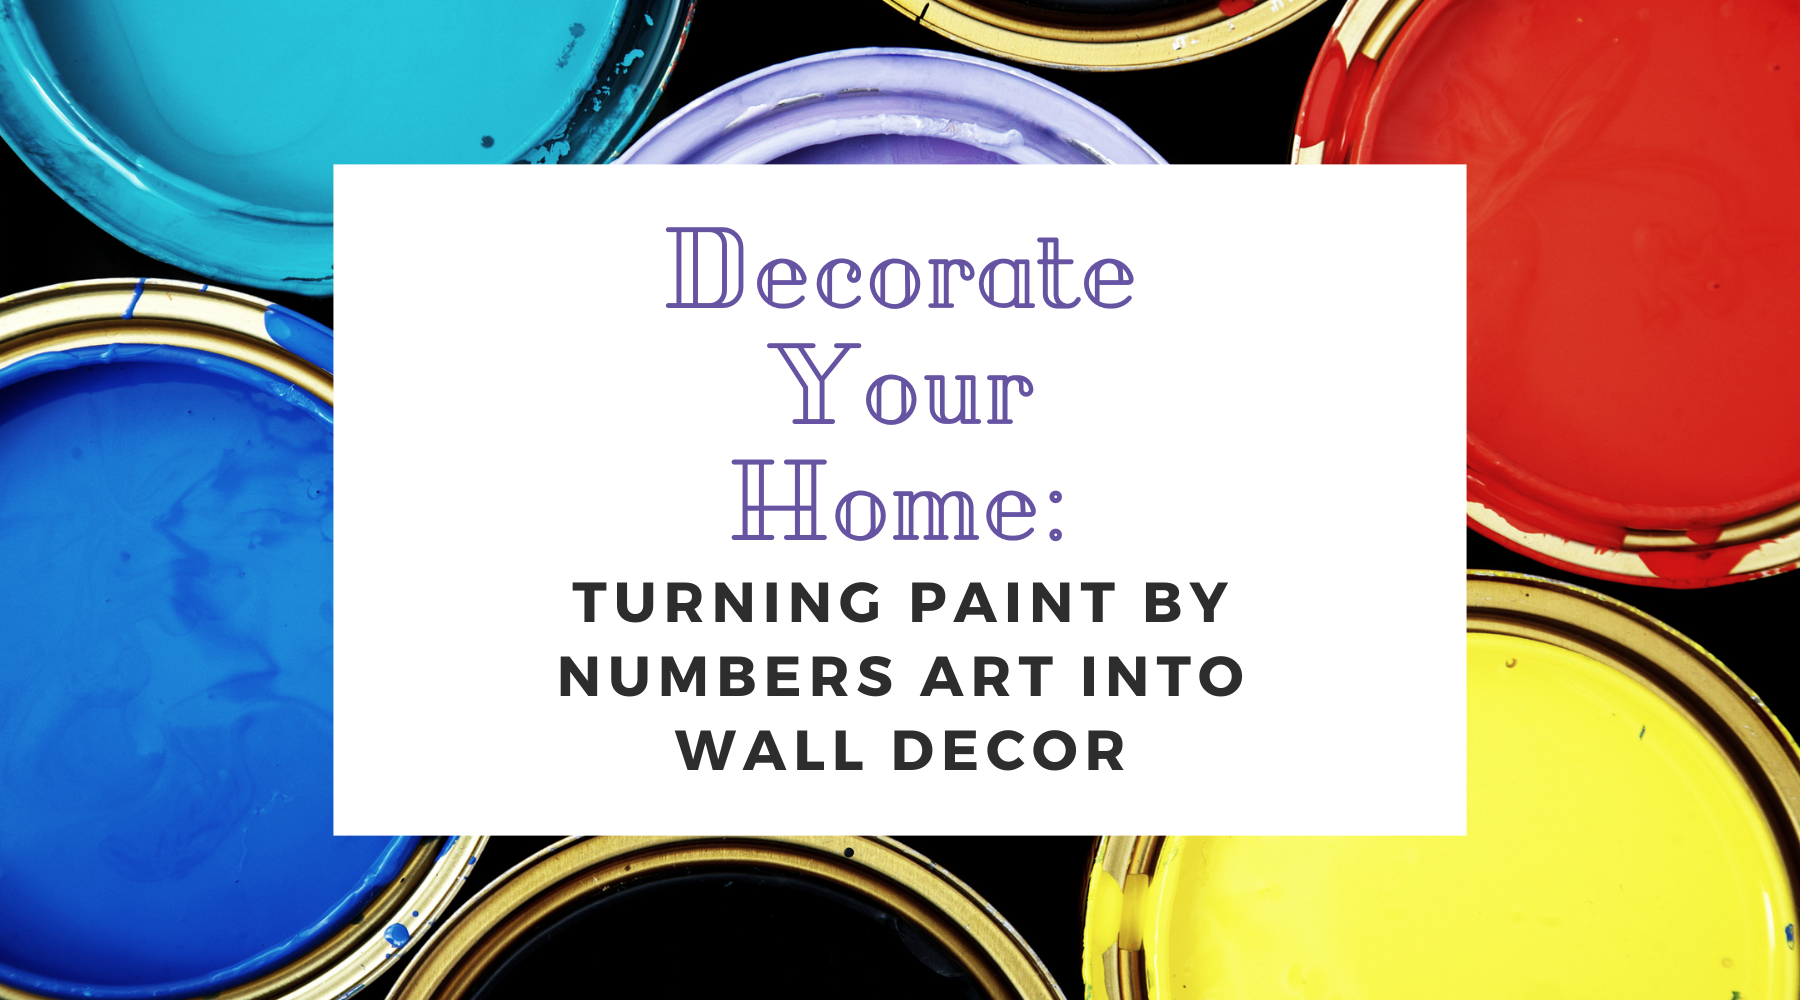 Decorate Your Home: Turning Paint by Numbers Art into Wall Decor